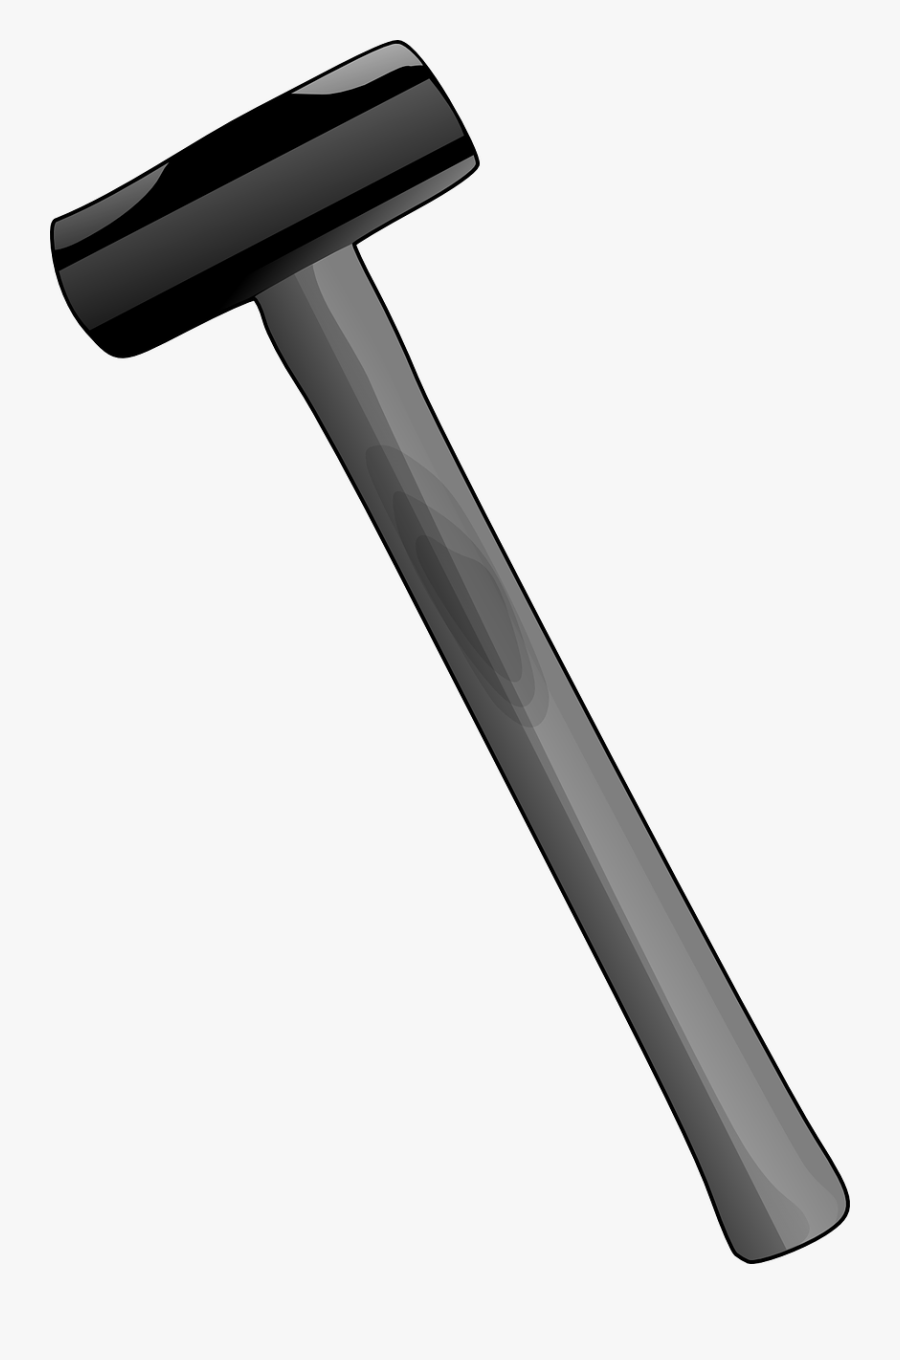 Hammer Tool Metal Free Picture - Blacksmith Hammer Clipart, Transparent Clipart